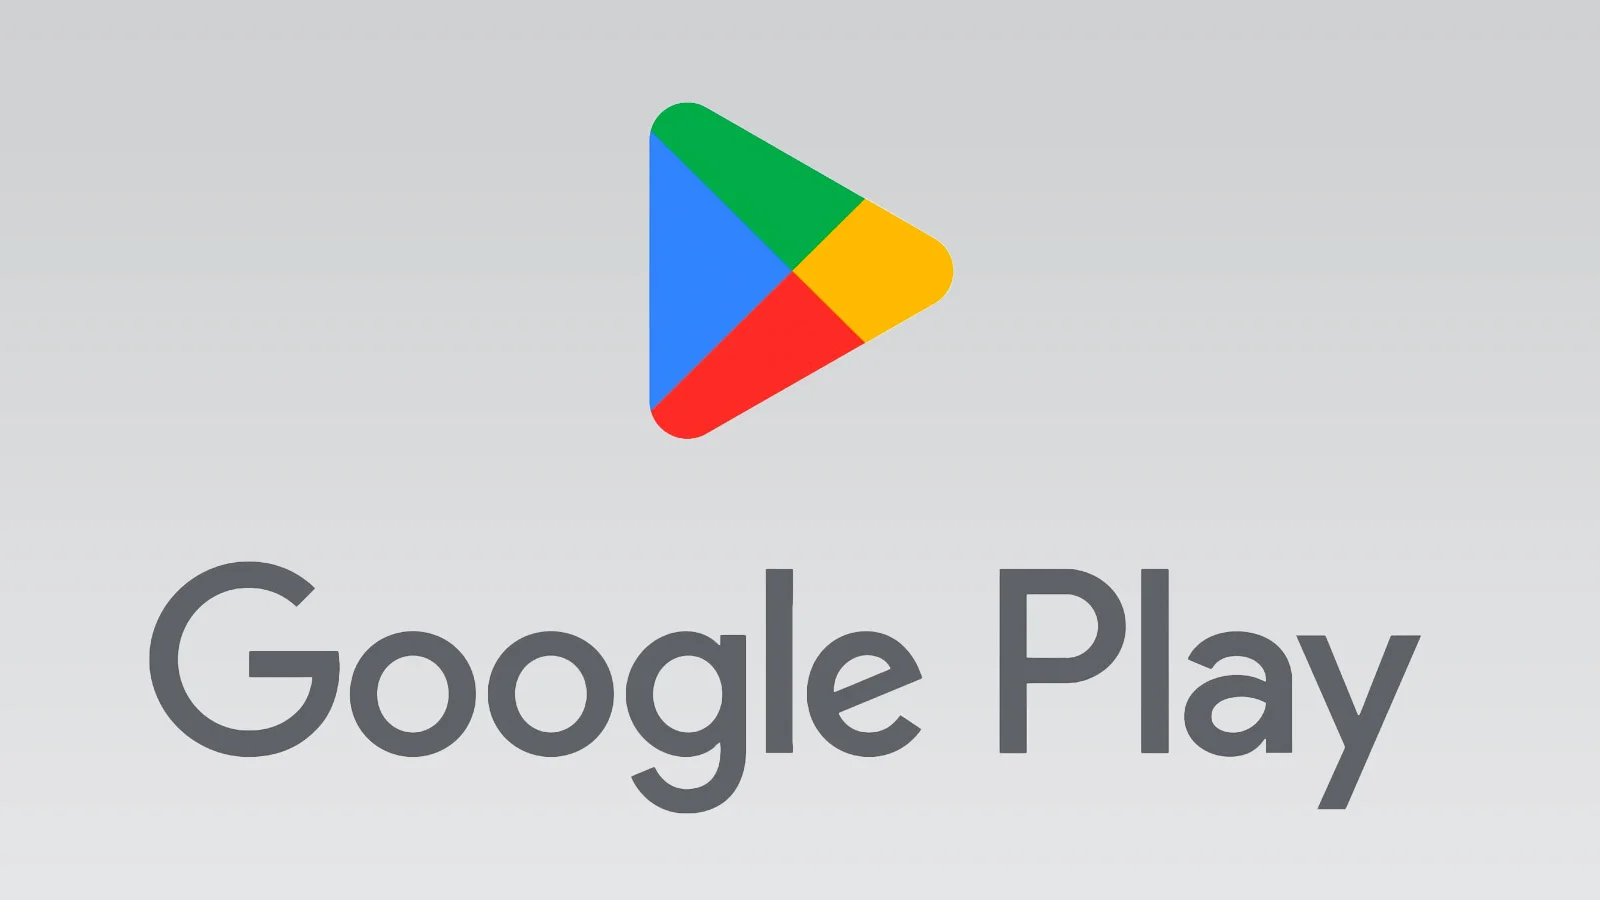 What is Google Play